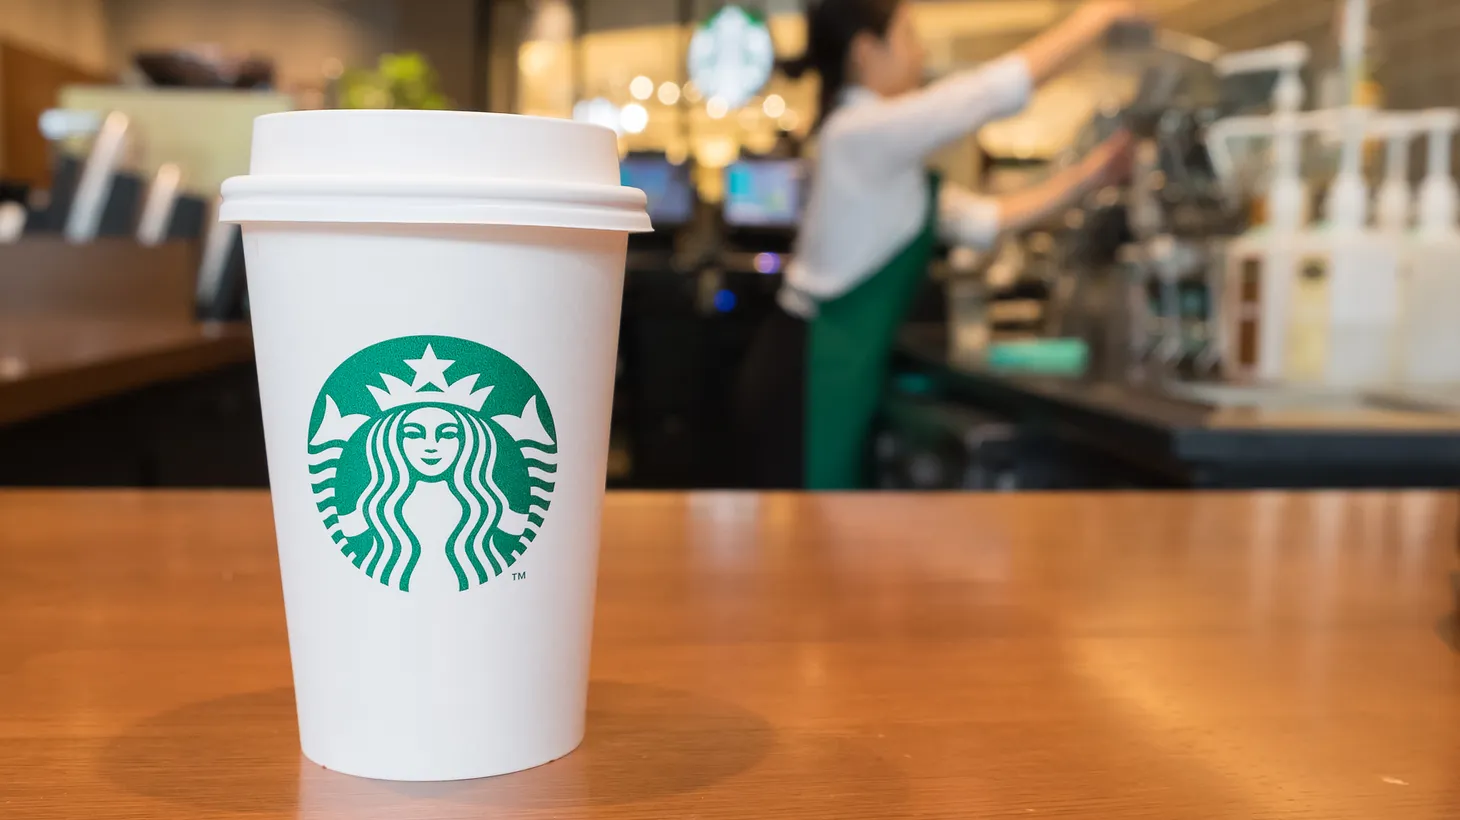 Starbucks says it will close cafes in Russia and stop shipping their products there.